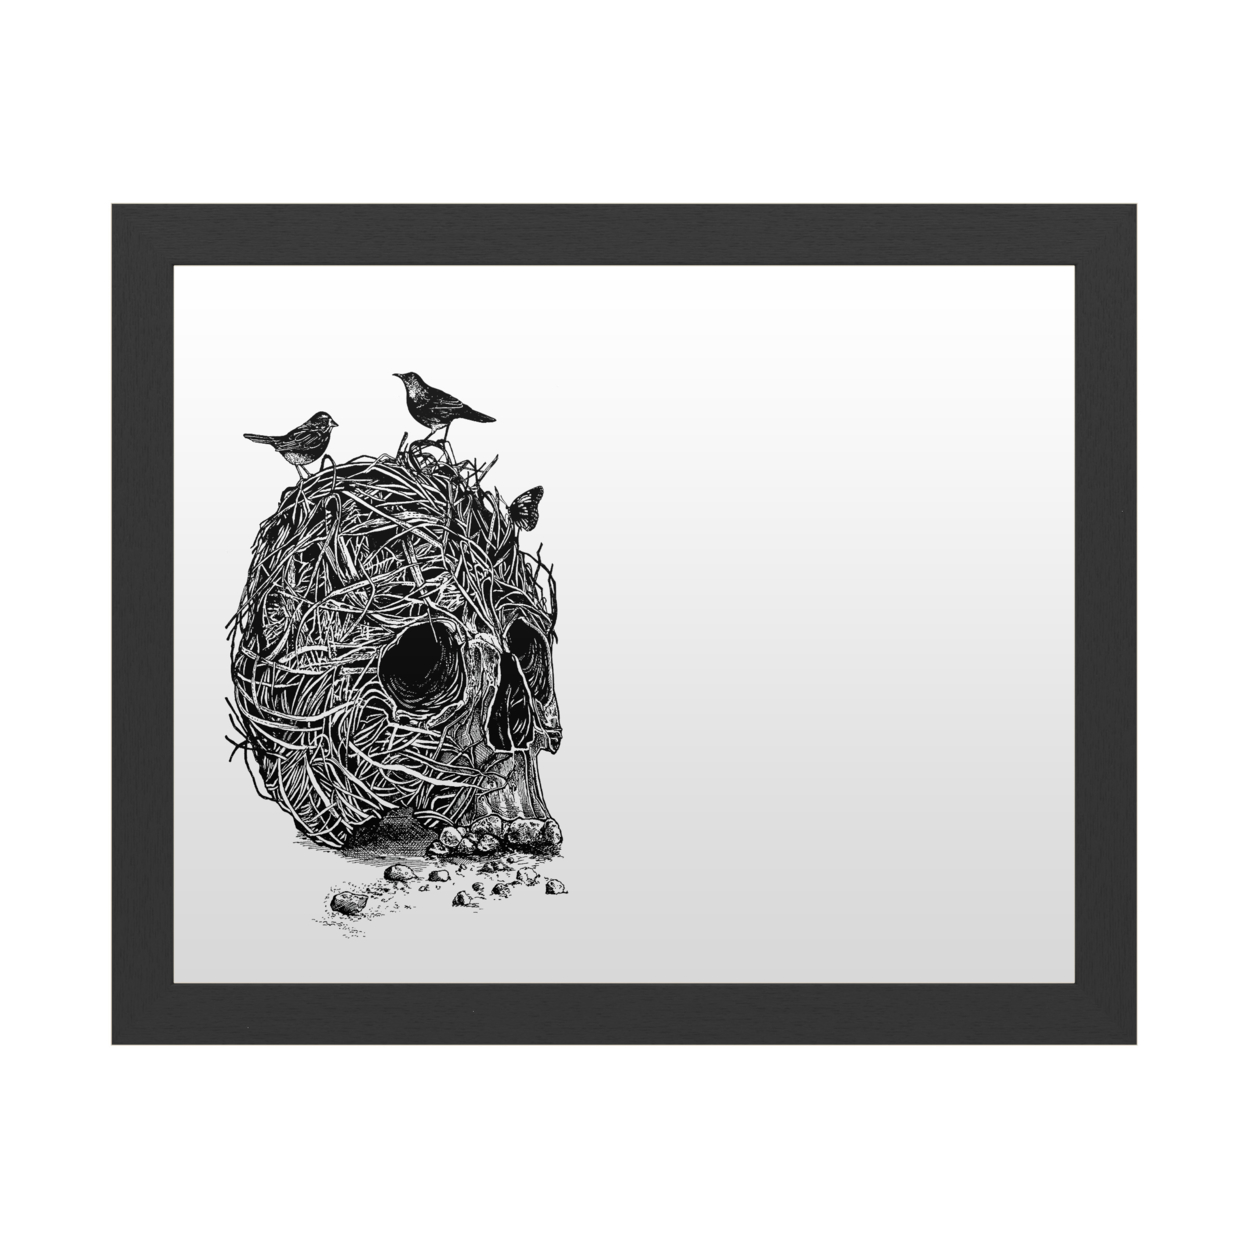 Dry Erase 16 X 20 Marker Board With Printed Artwork - Rachel Caldwel Skull Nest Binds White Board - Ready To Hang